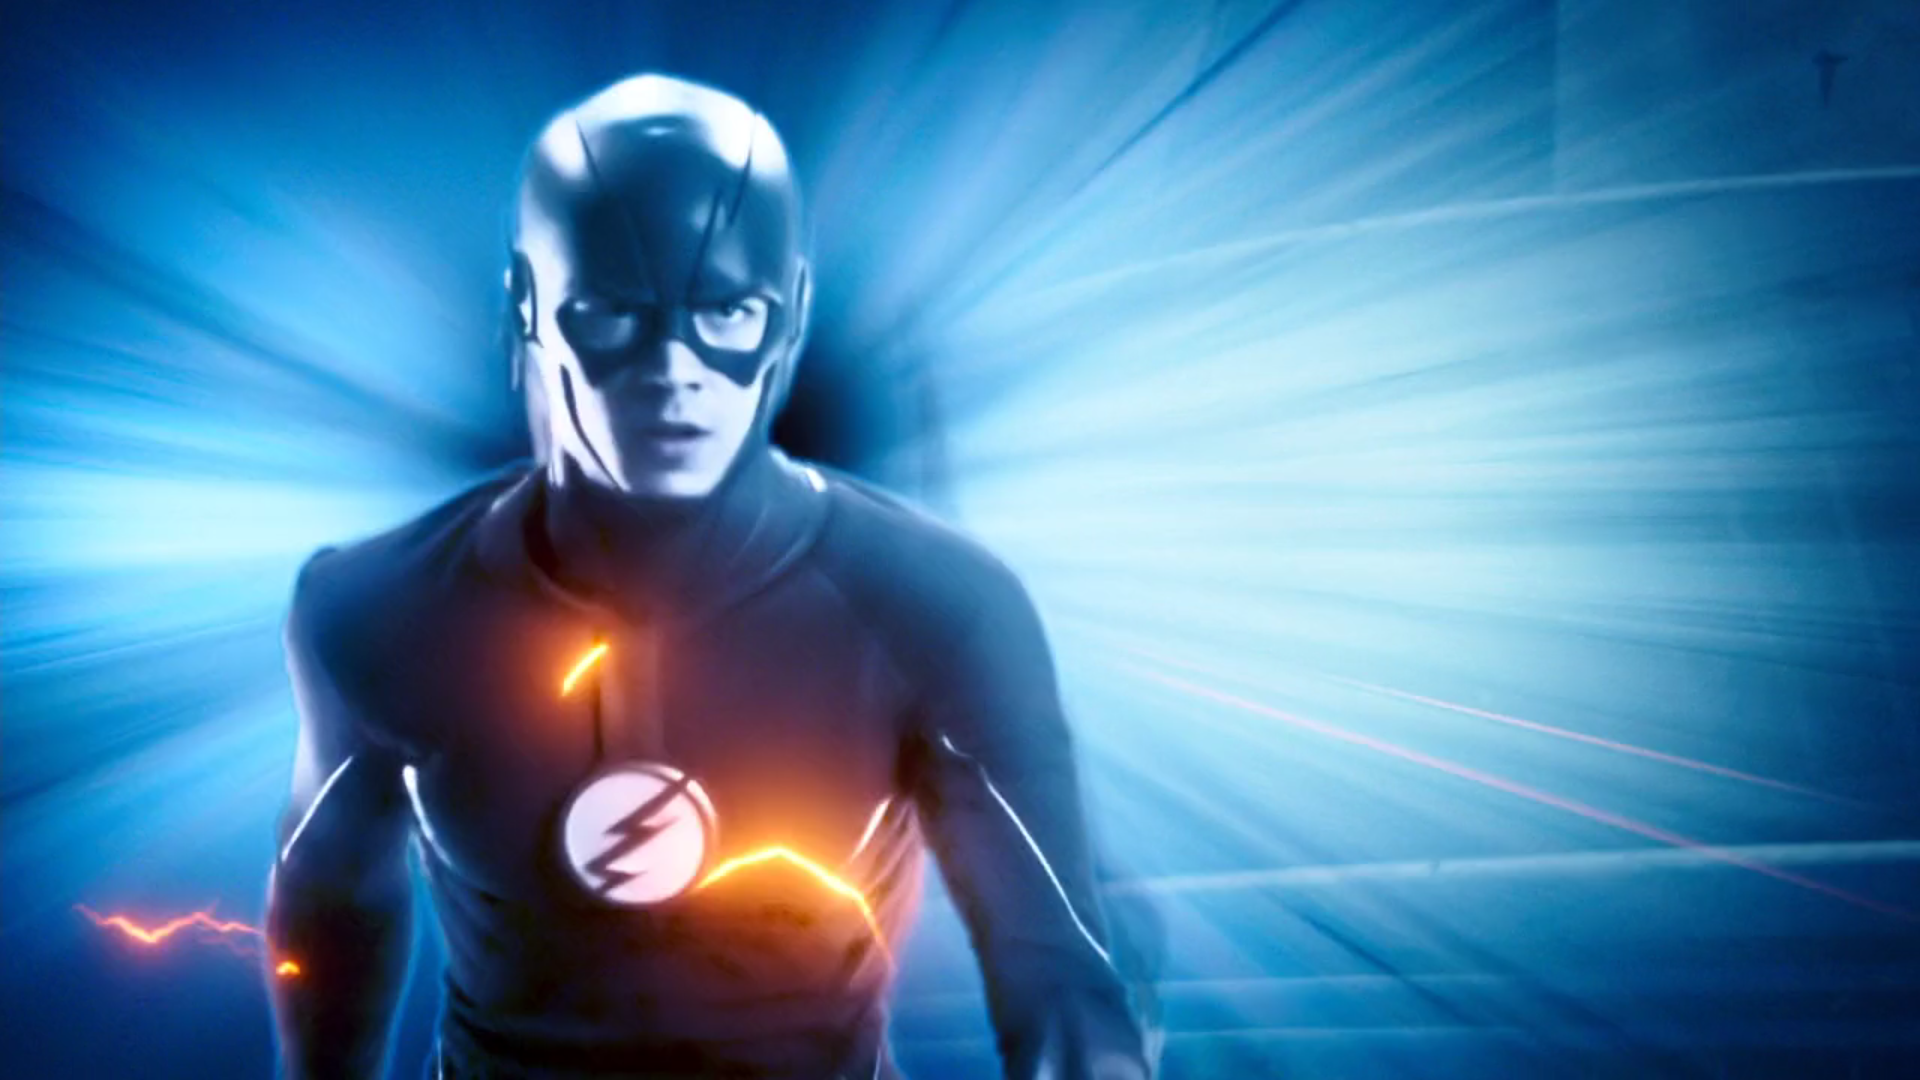 Will The Flash Time Travel In Season 4?